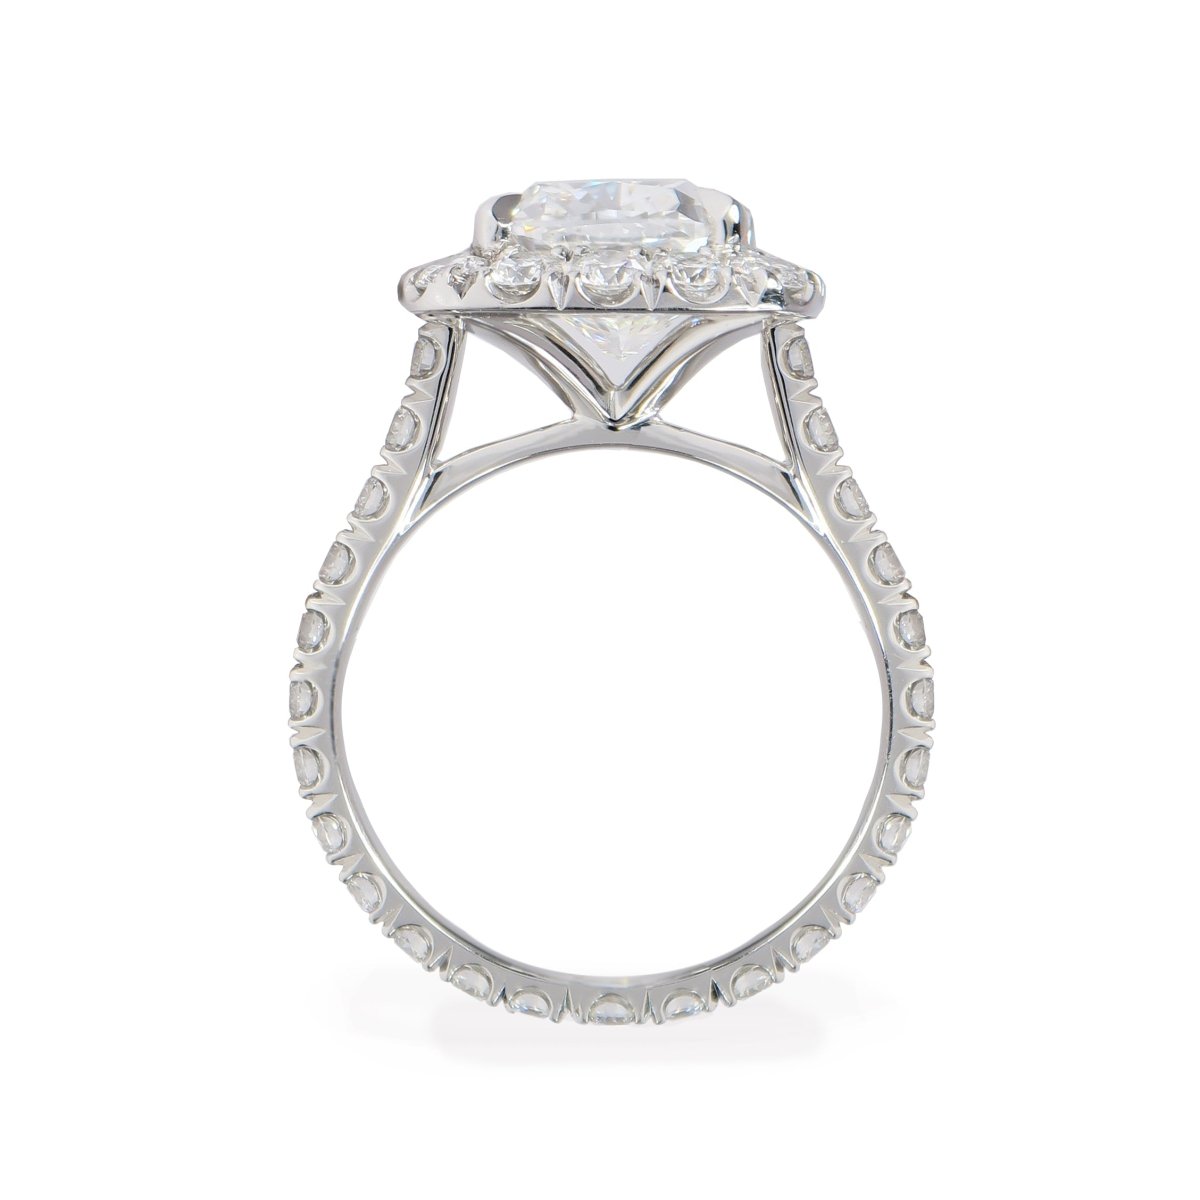 CUSHION CUT ENGAGEMENT RING - ALL ENGAGEMENT RINGS